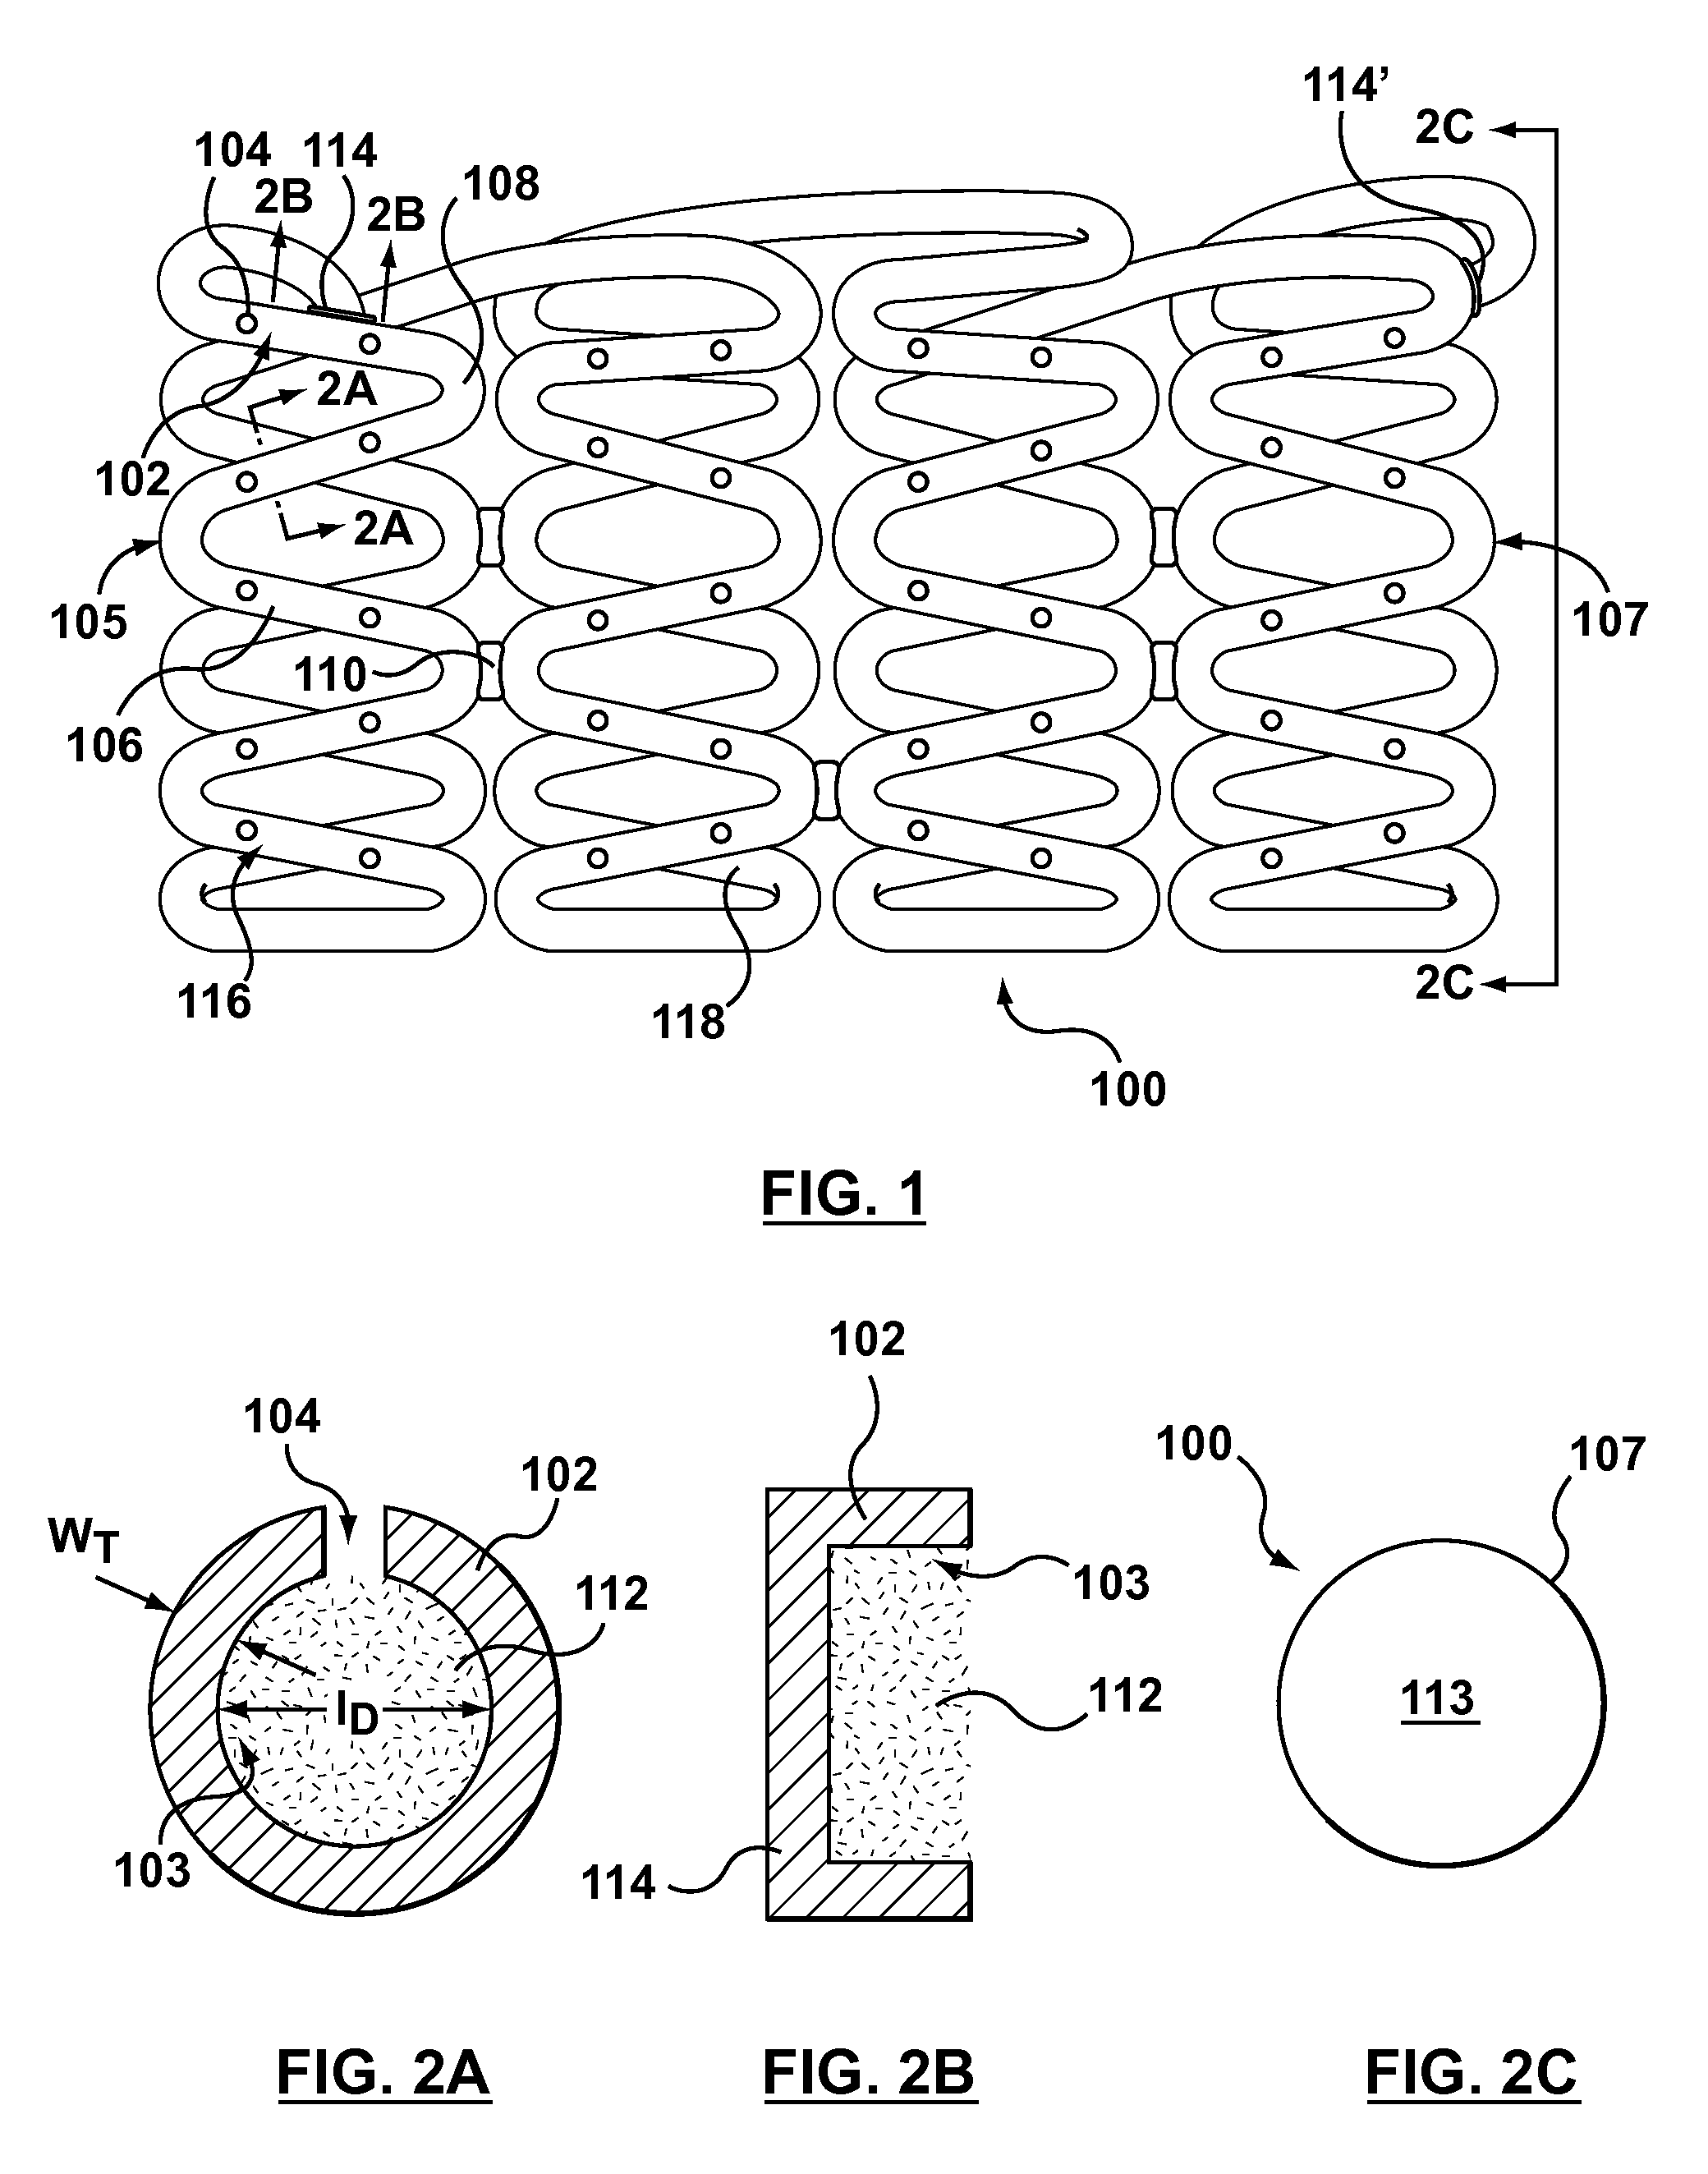 Apparatus and methods for filling a drug eluting medical device via capillary action